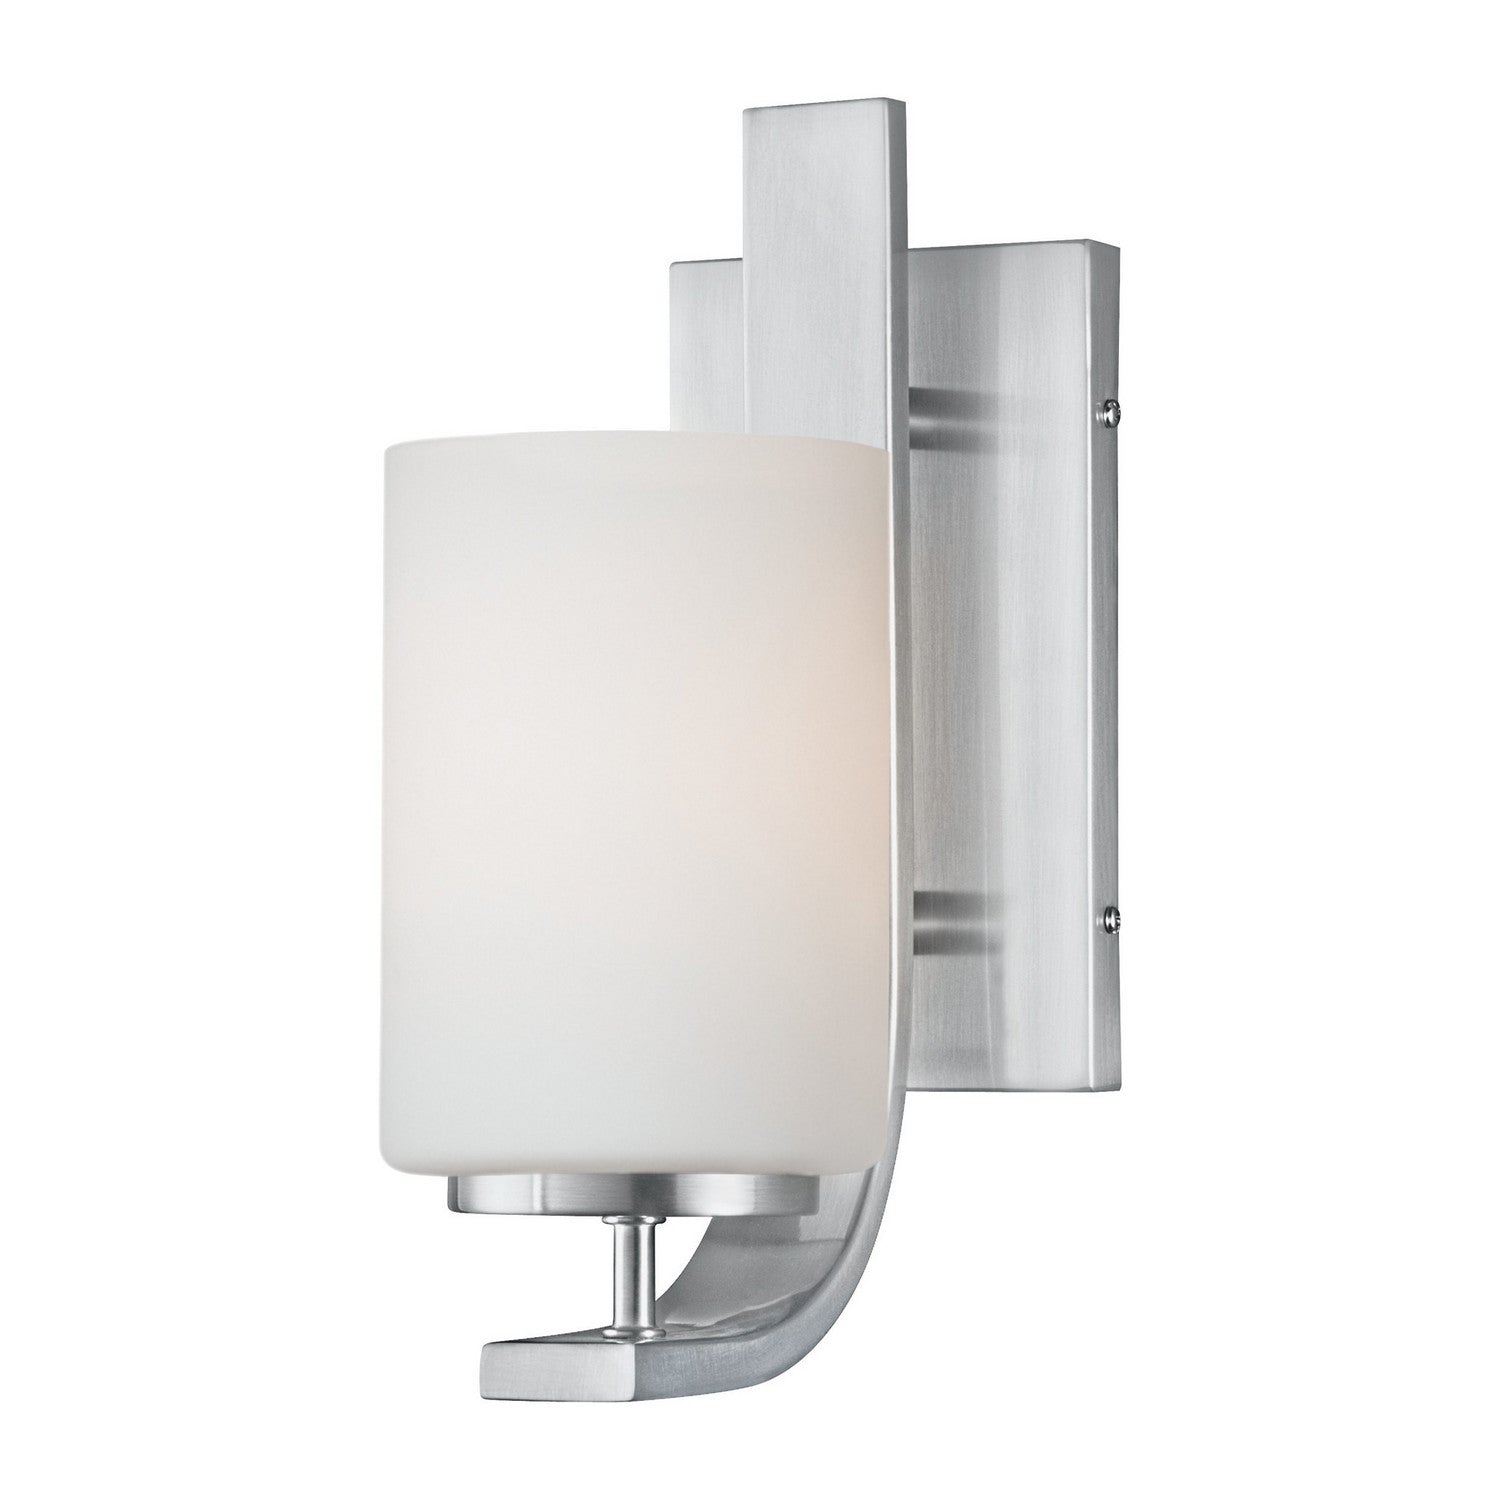 ELK Home - TN0005217 - One Light Wall Sconce - Pendenza - Brushed Nickel